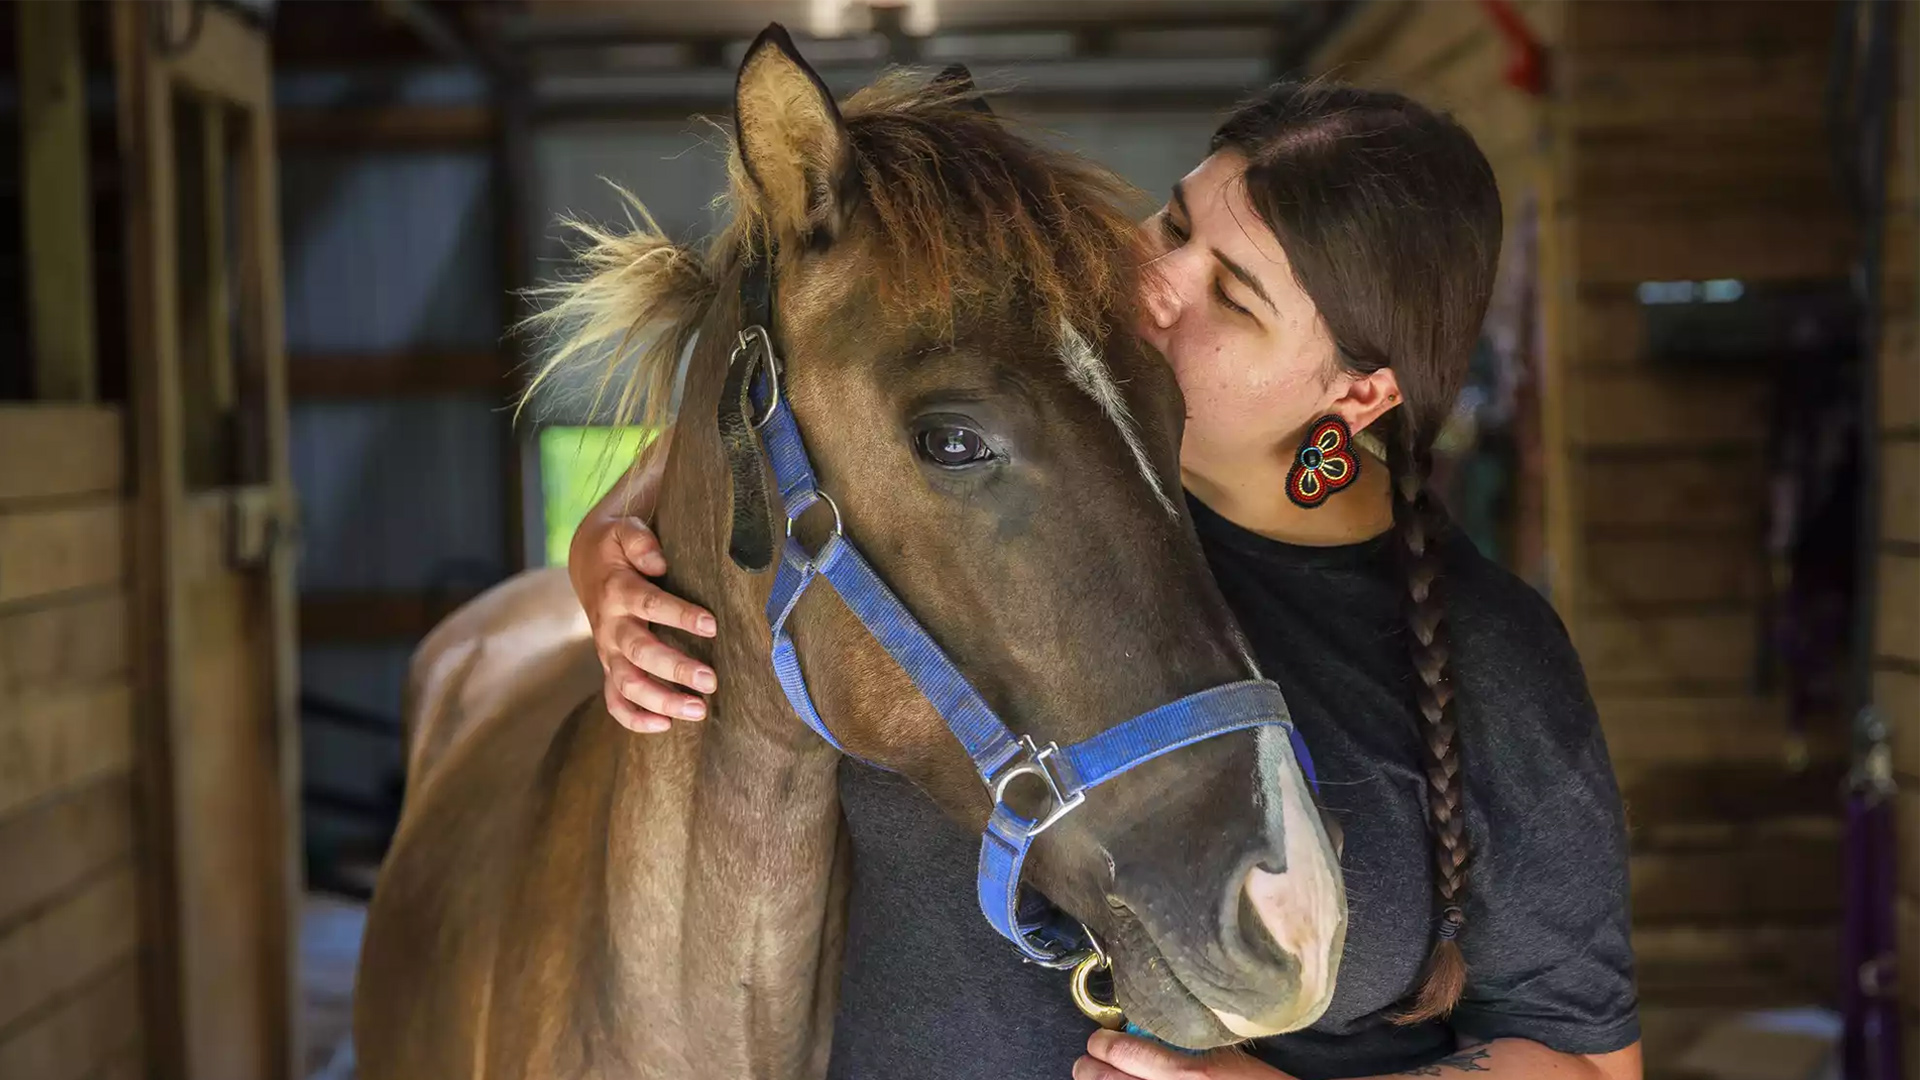 Em Loerzel is a graduate student and White Earth Nation descendant who started The Humble Horse, a nonprofit in River Falls, Wis., dedicated to reviving the Ojibwe Horse, a rare breed that has adapted to the forests along the Minnesota-Canada border.